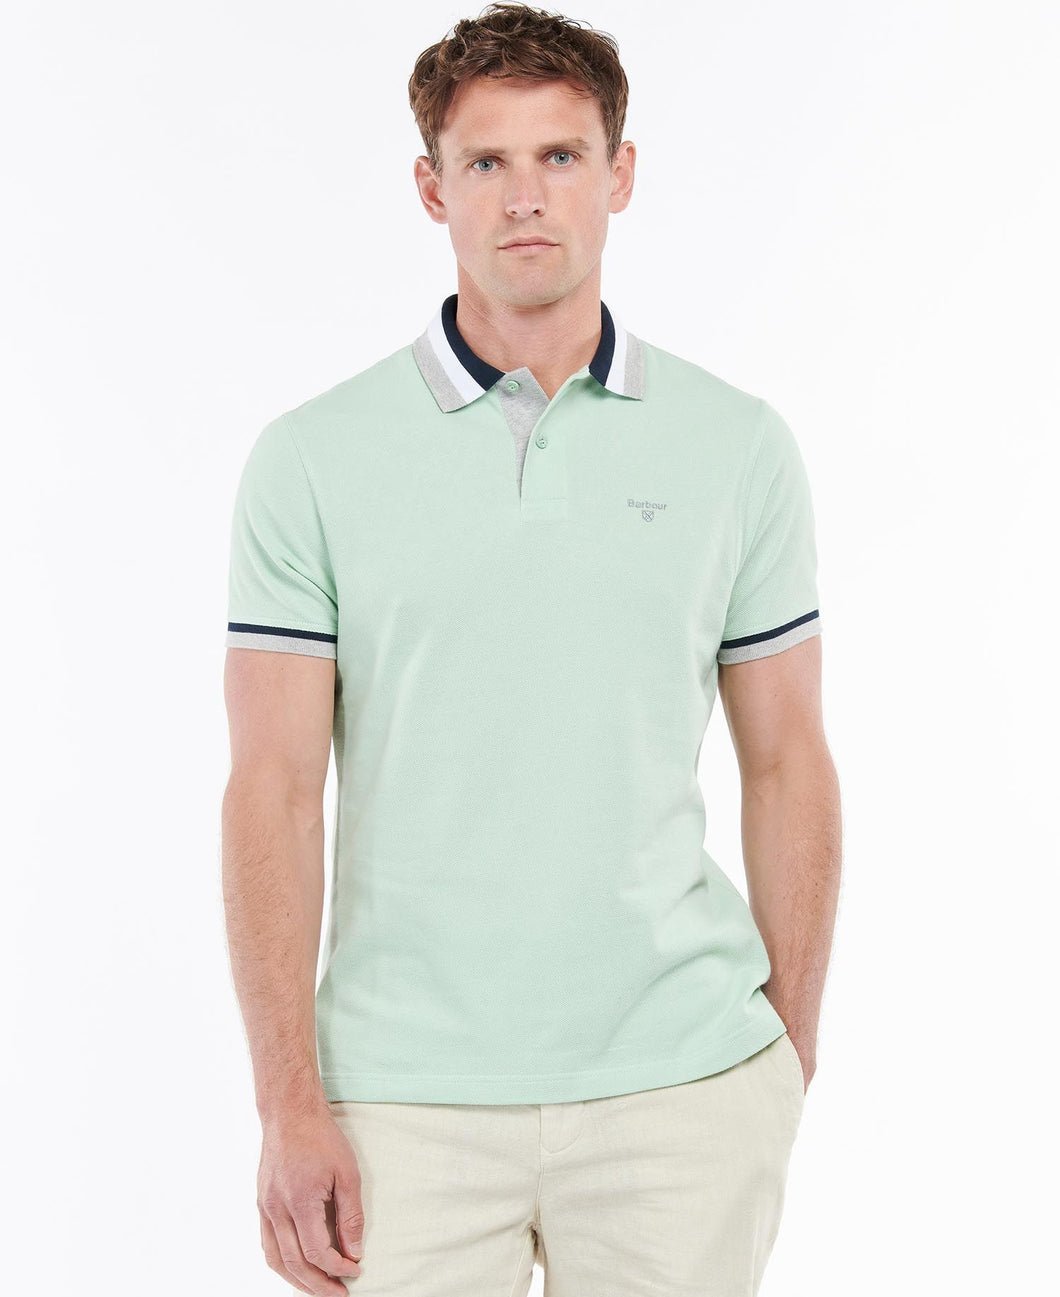 Barbour - Frinkle Polo, Dusty Mint